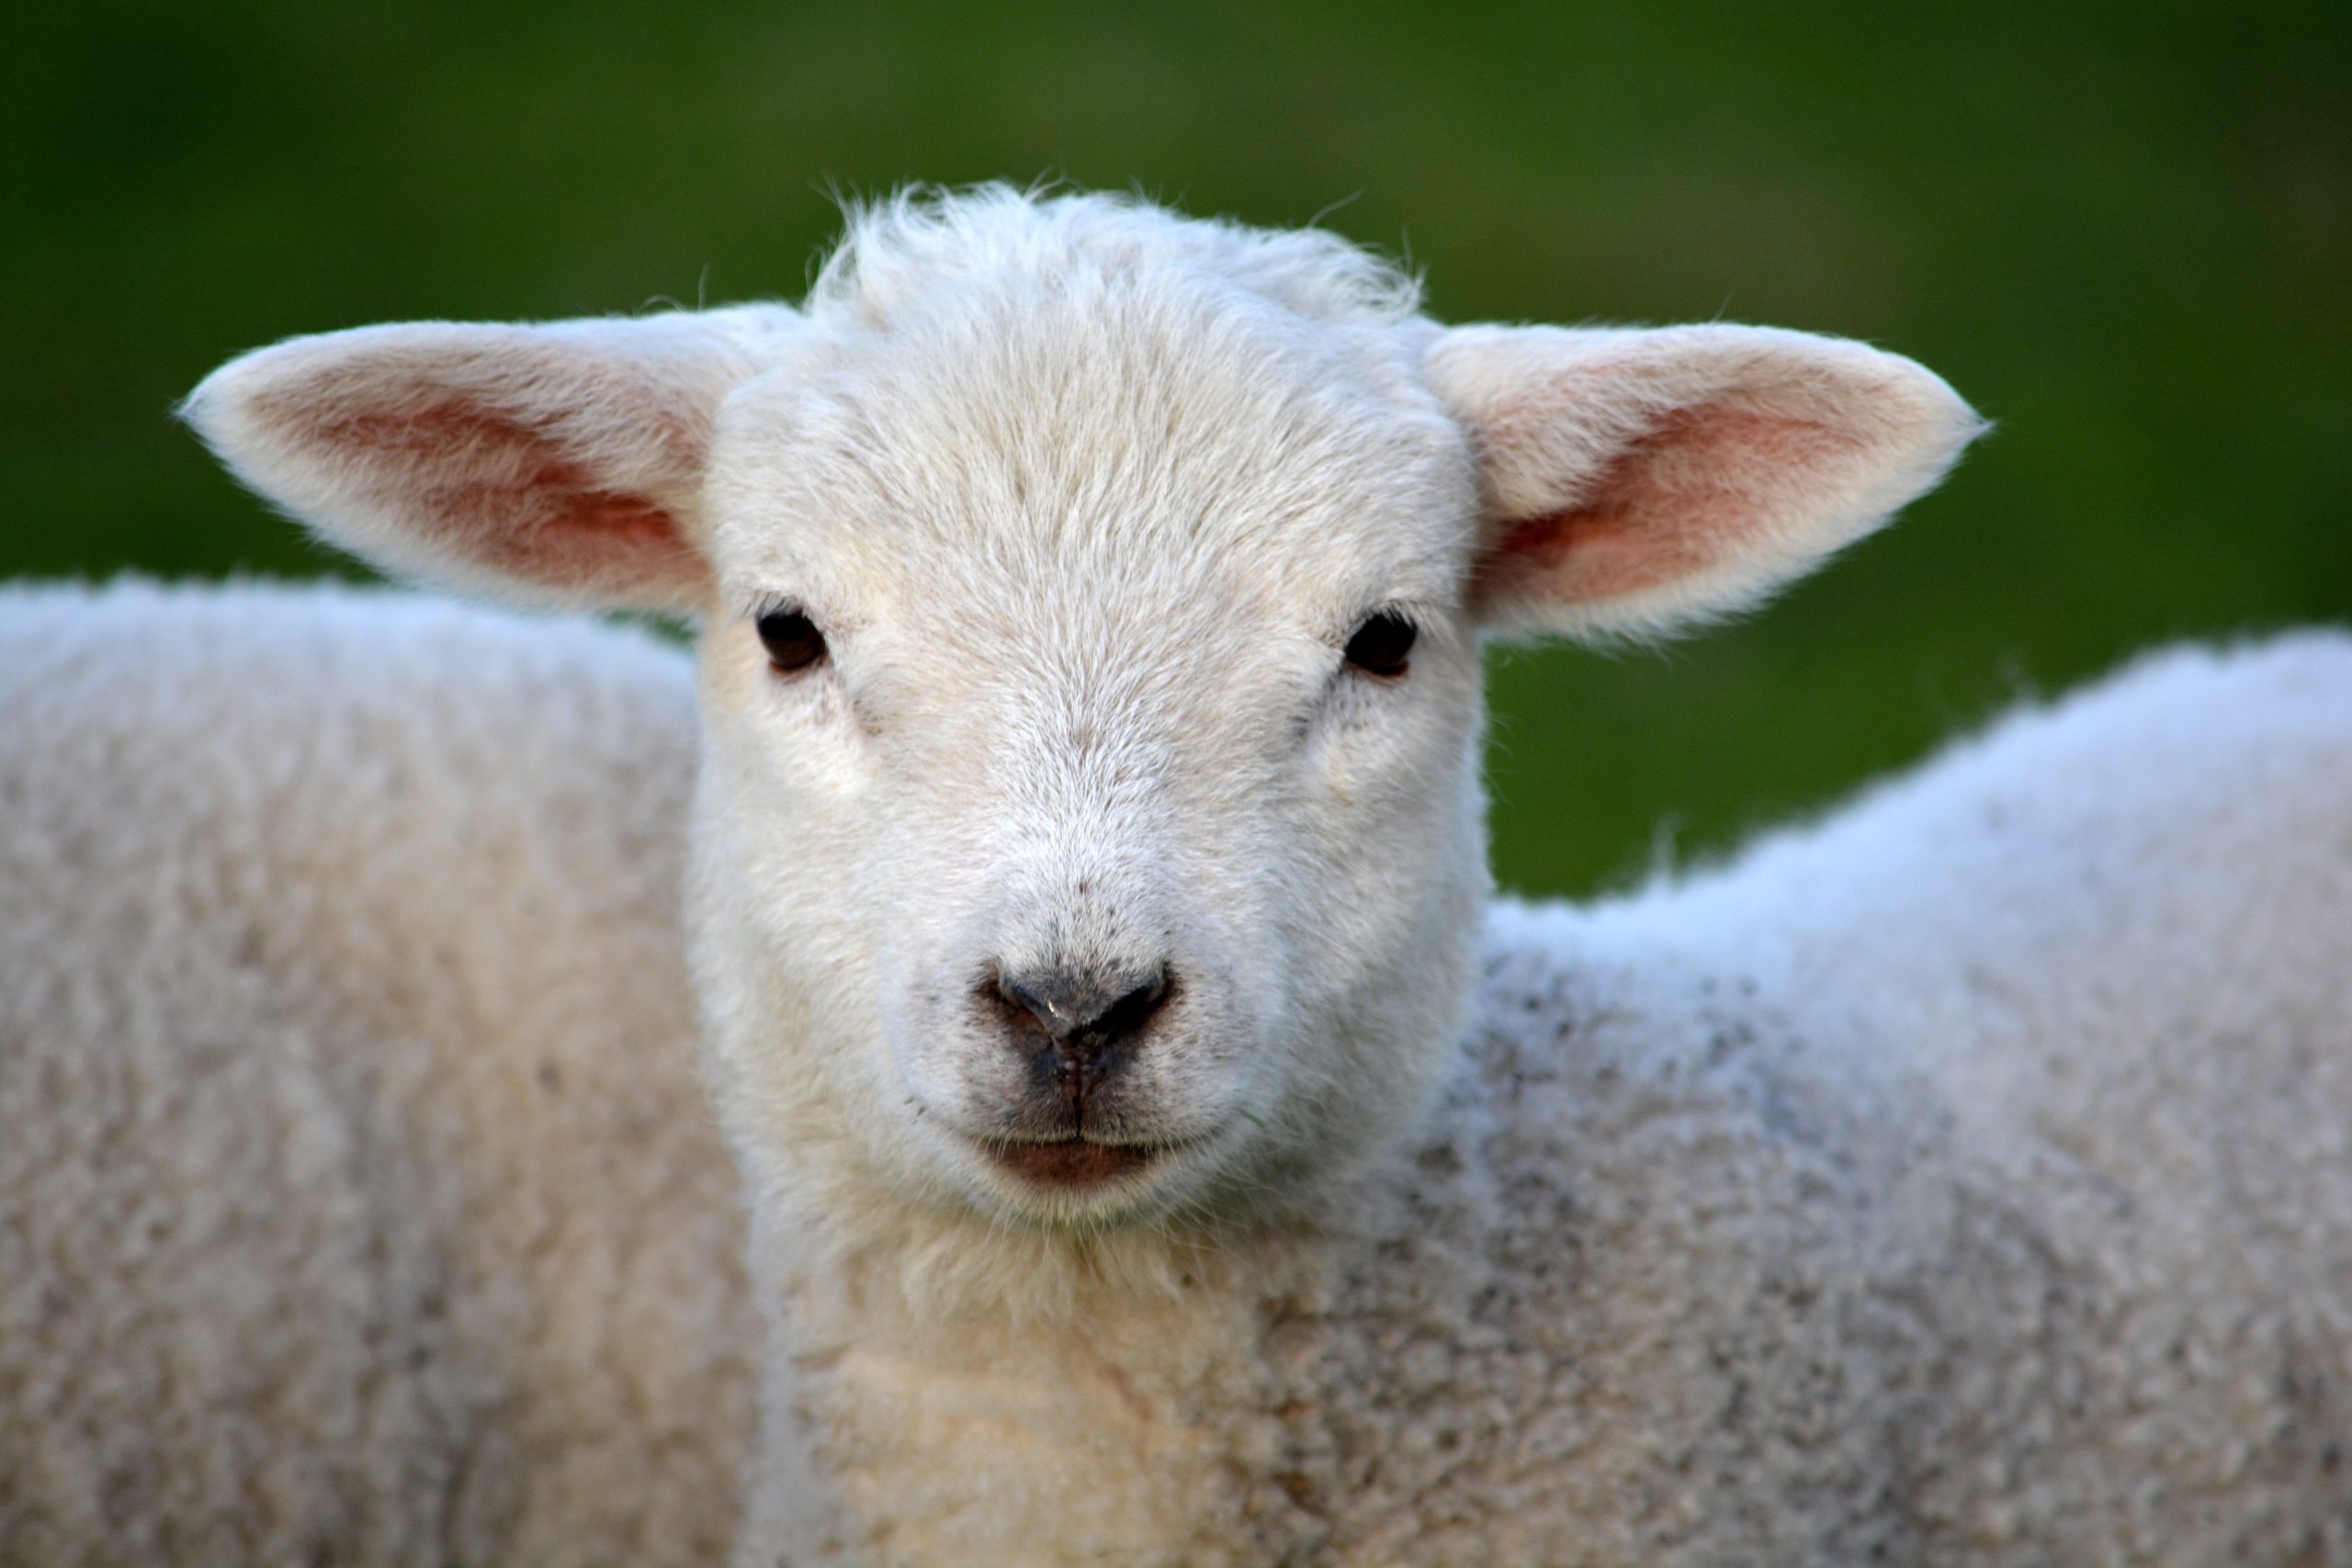 photo of a sheep